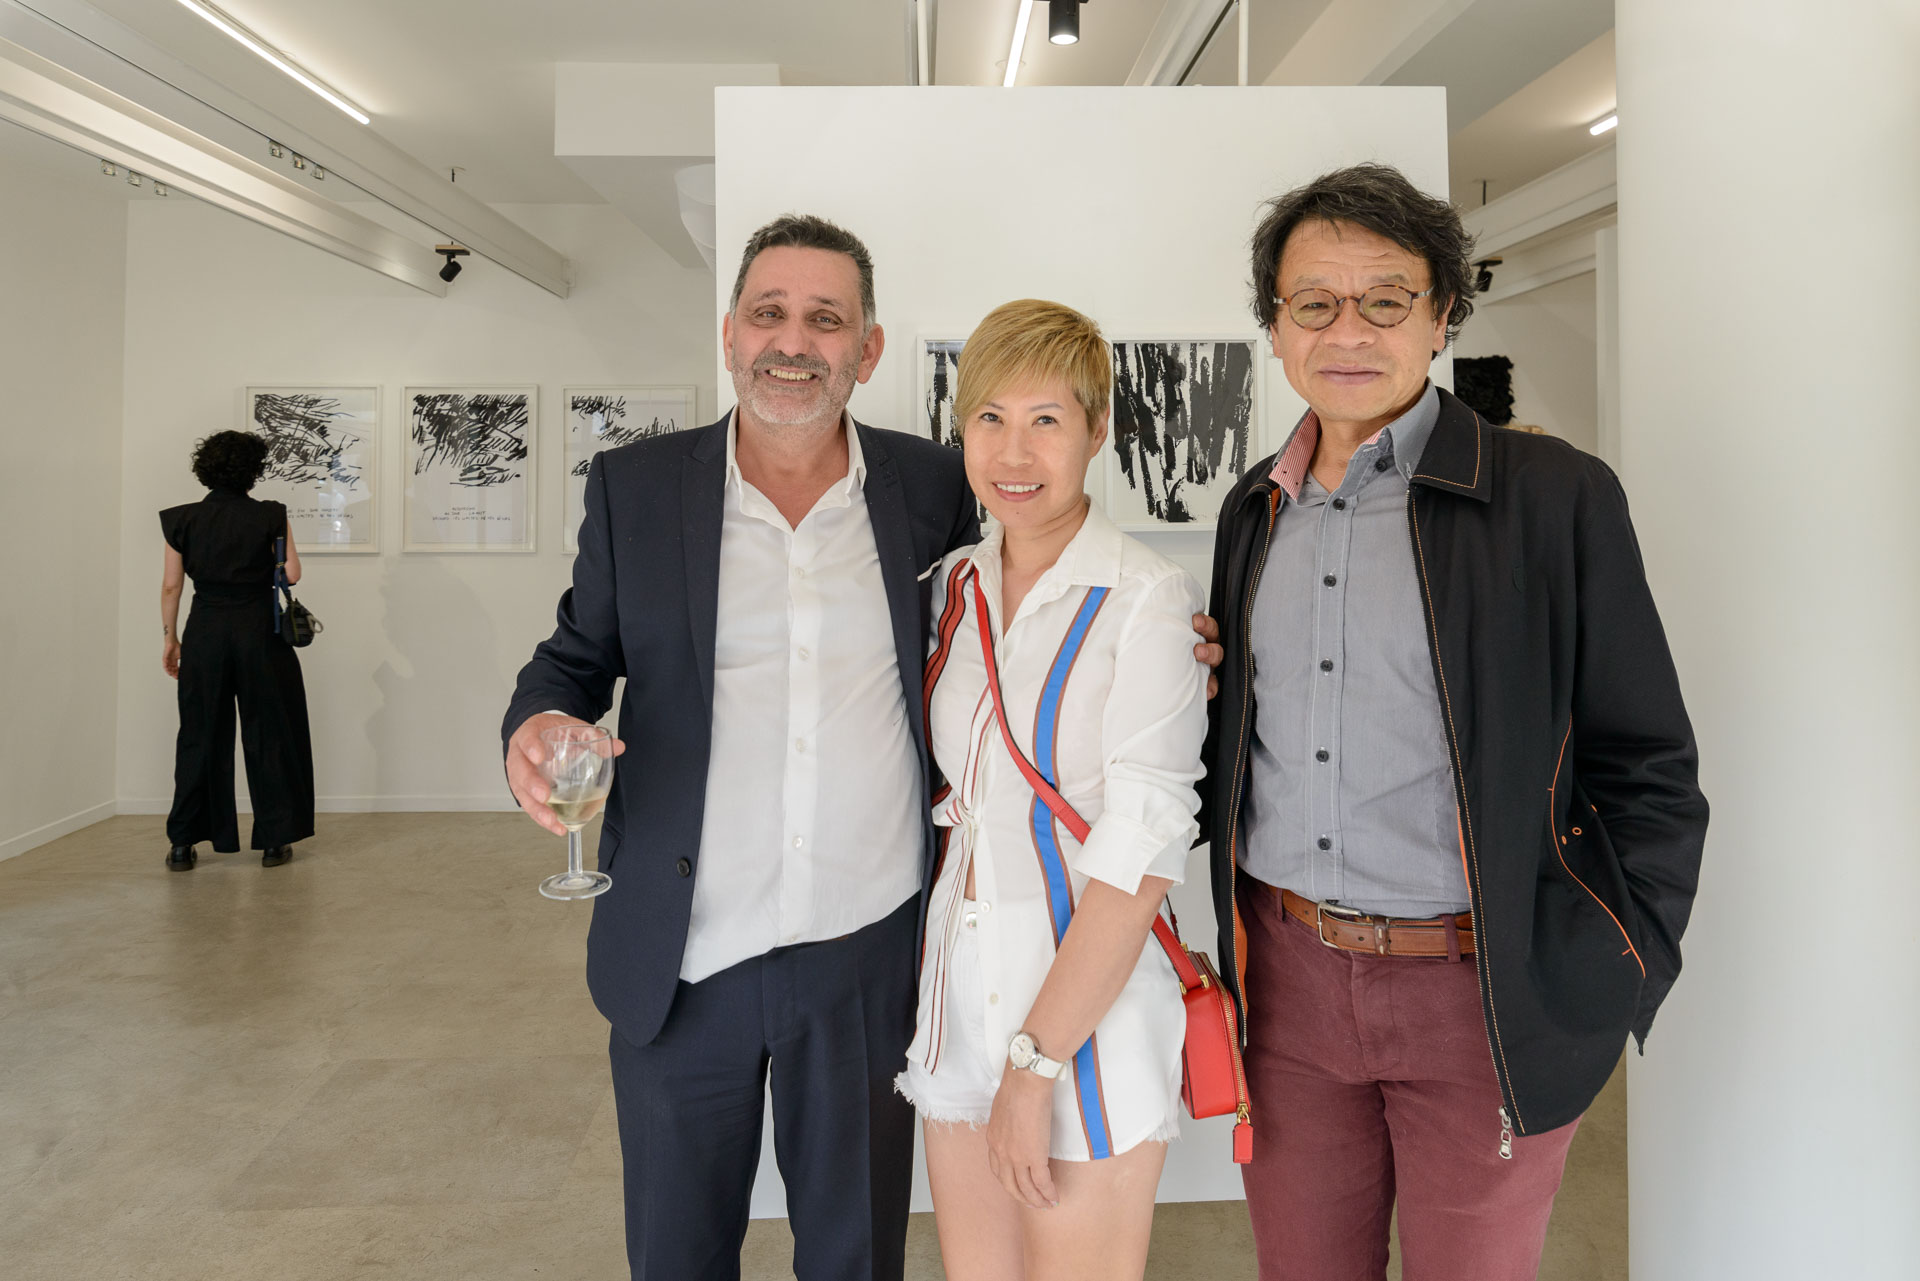 Alixe Fu and Teddy Tibi during the meeting with Joël Andrianomearisoa  (©Bardig)